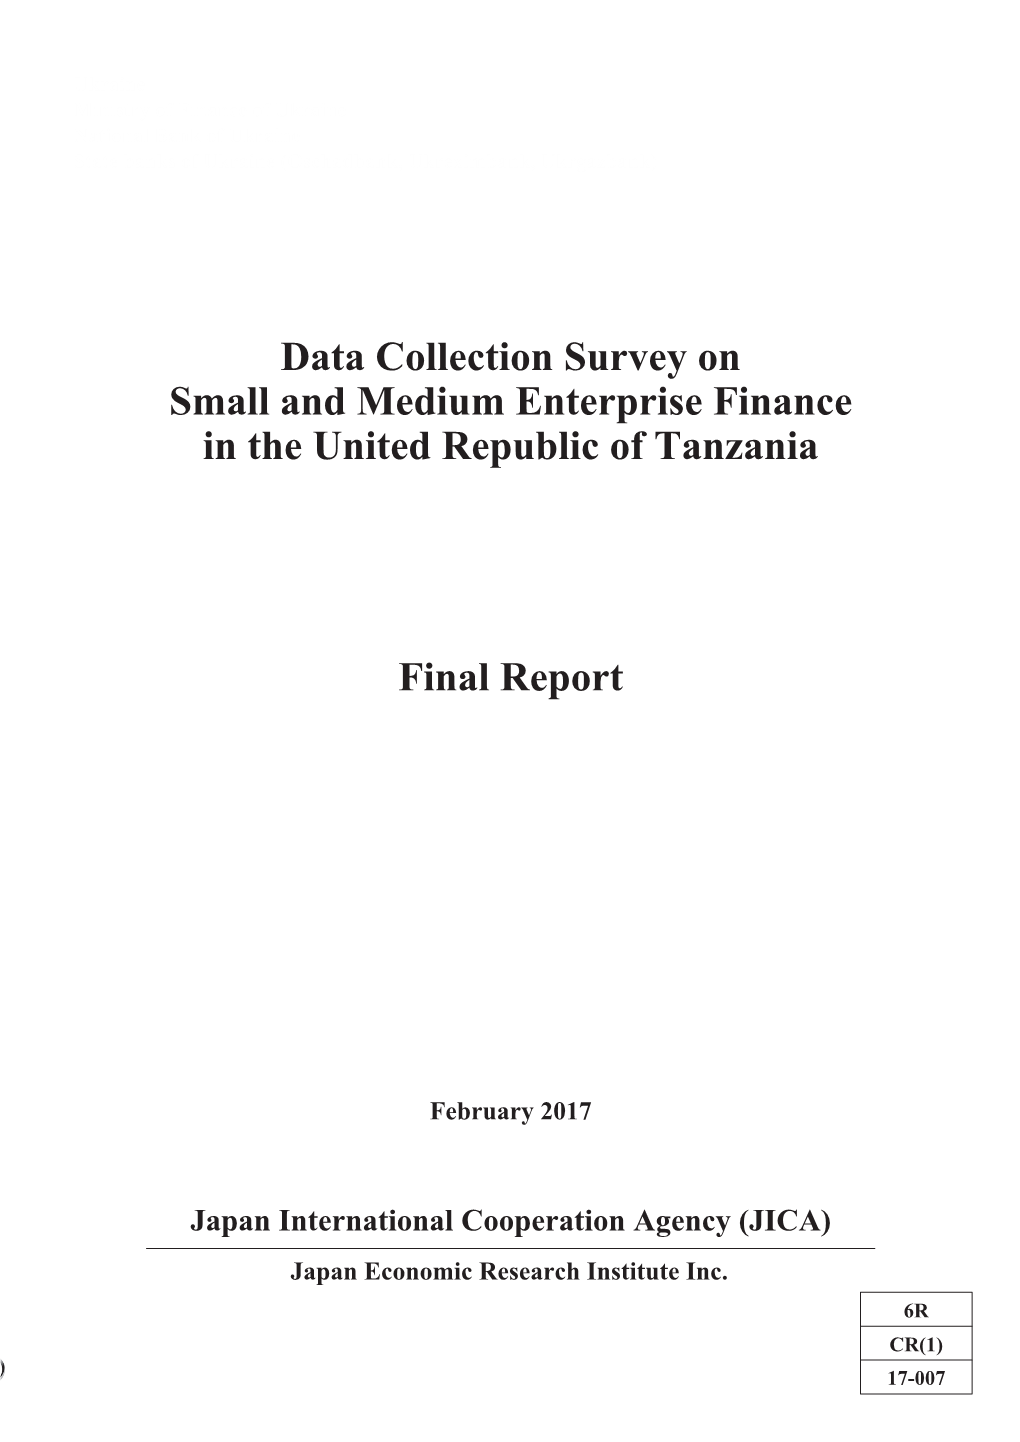 Data Collection Survey on Small and Medium Enterprise Finance in the United Republic of Tanzania